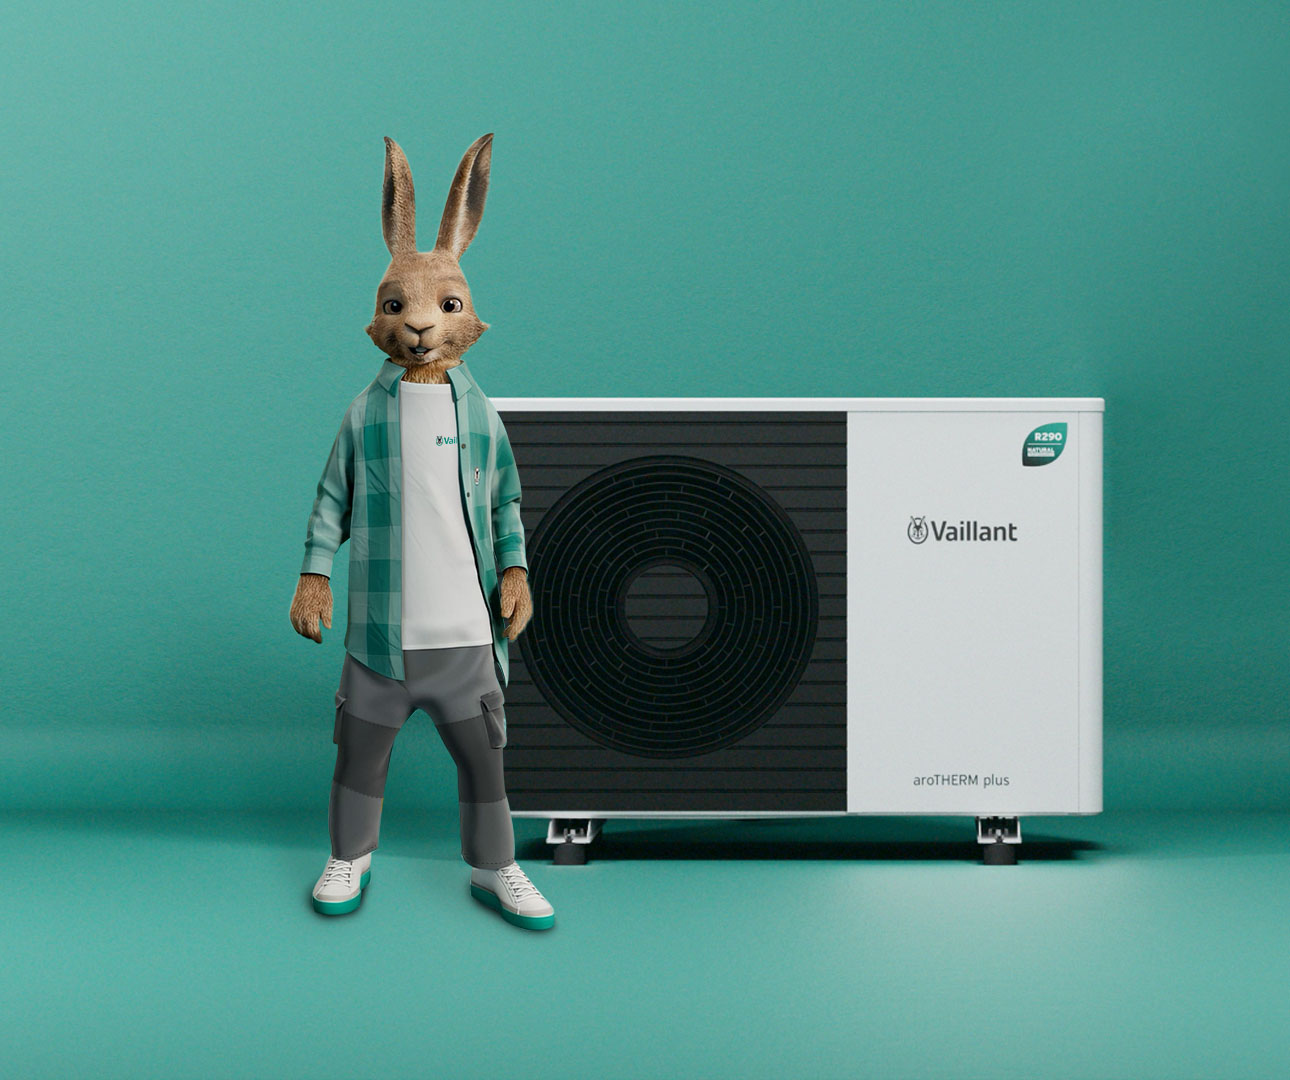 https://www.vaillant.co.uk/local-images/vaillant-hare-crop-copy.jpg